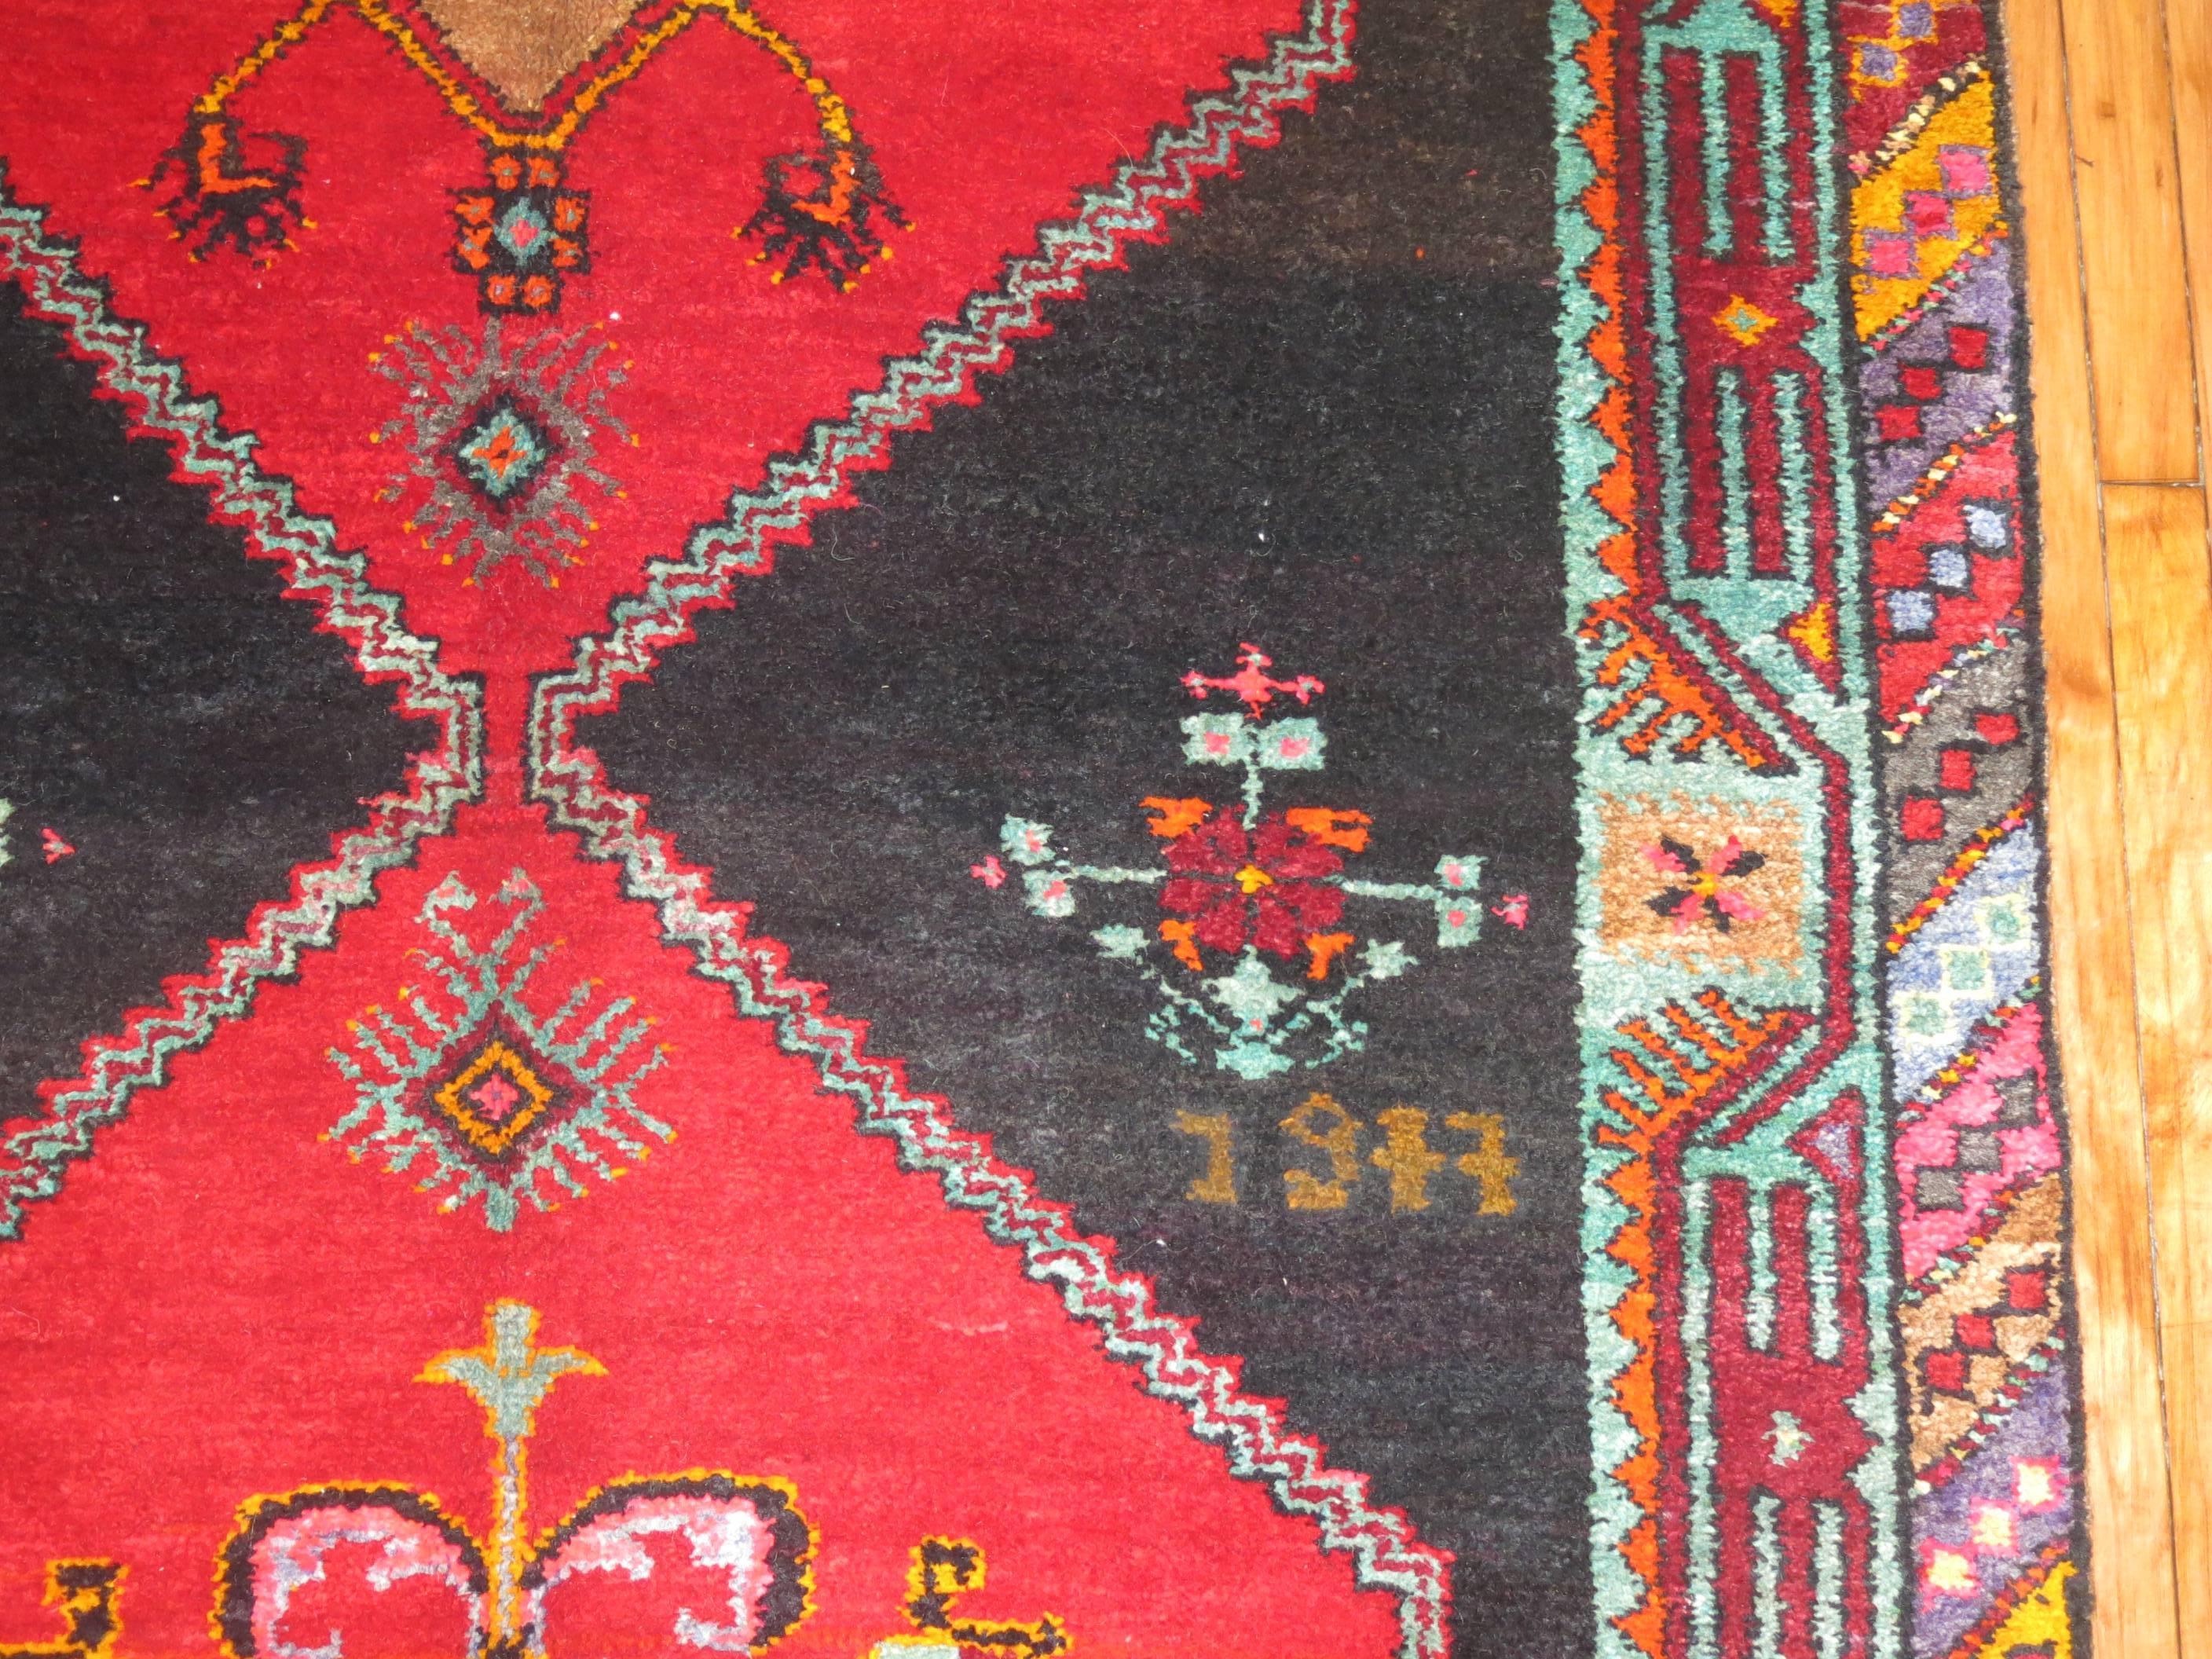 Bohemian style Turkish Kars long and wide gallery/corridor size rug.

5'1'' x 16'11''

Kars is a city located in Eastern Anatolia, has played an important role in Turkish history and was at the centre of the Turkish-Russian War between 1877-1878